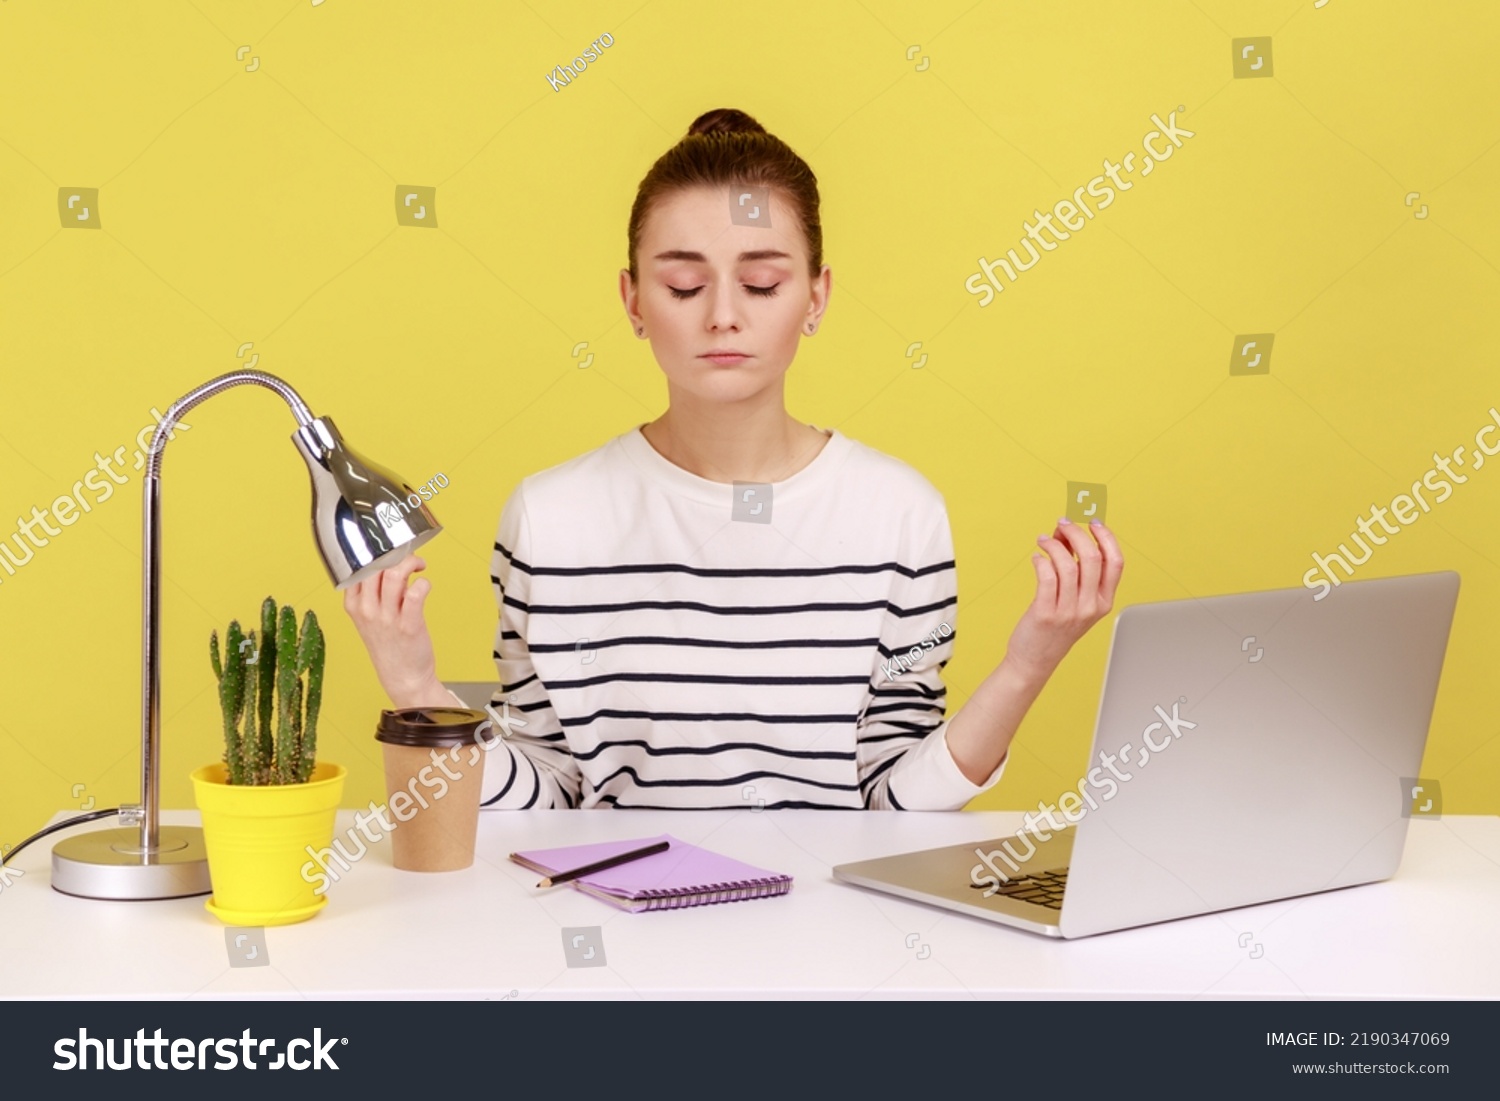 Peaceful mind, break at work. Calm woman sitting at workplace with laptop and raising hands in mudra gesture, meditating resting at home office. Indoor studio studio shot isolated on yellow background #2190347069